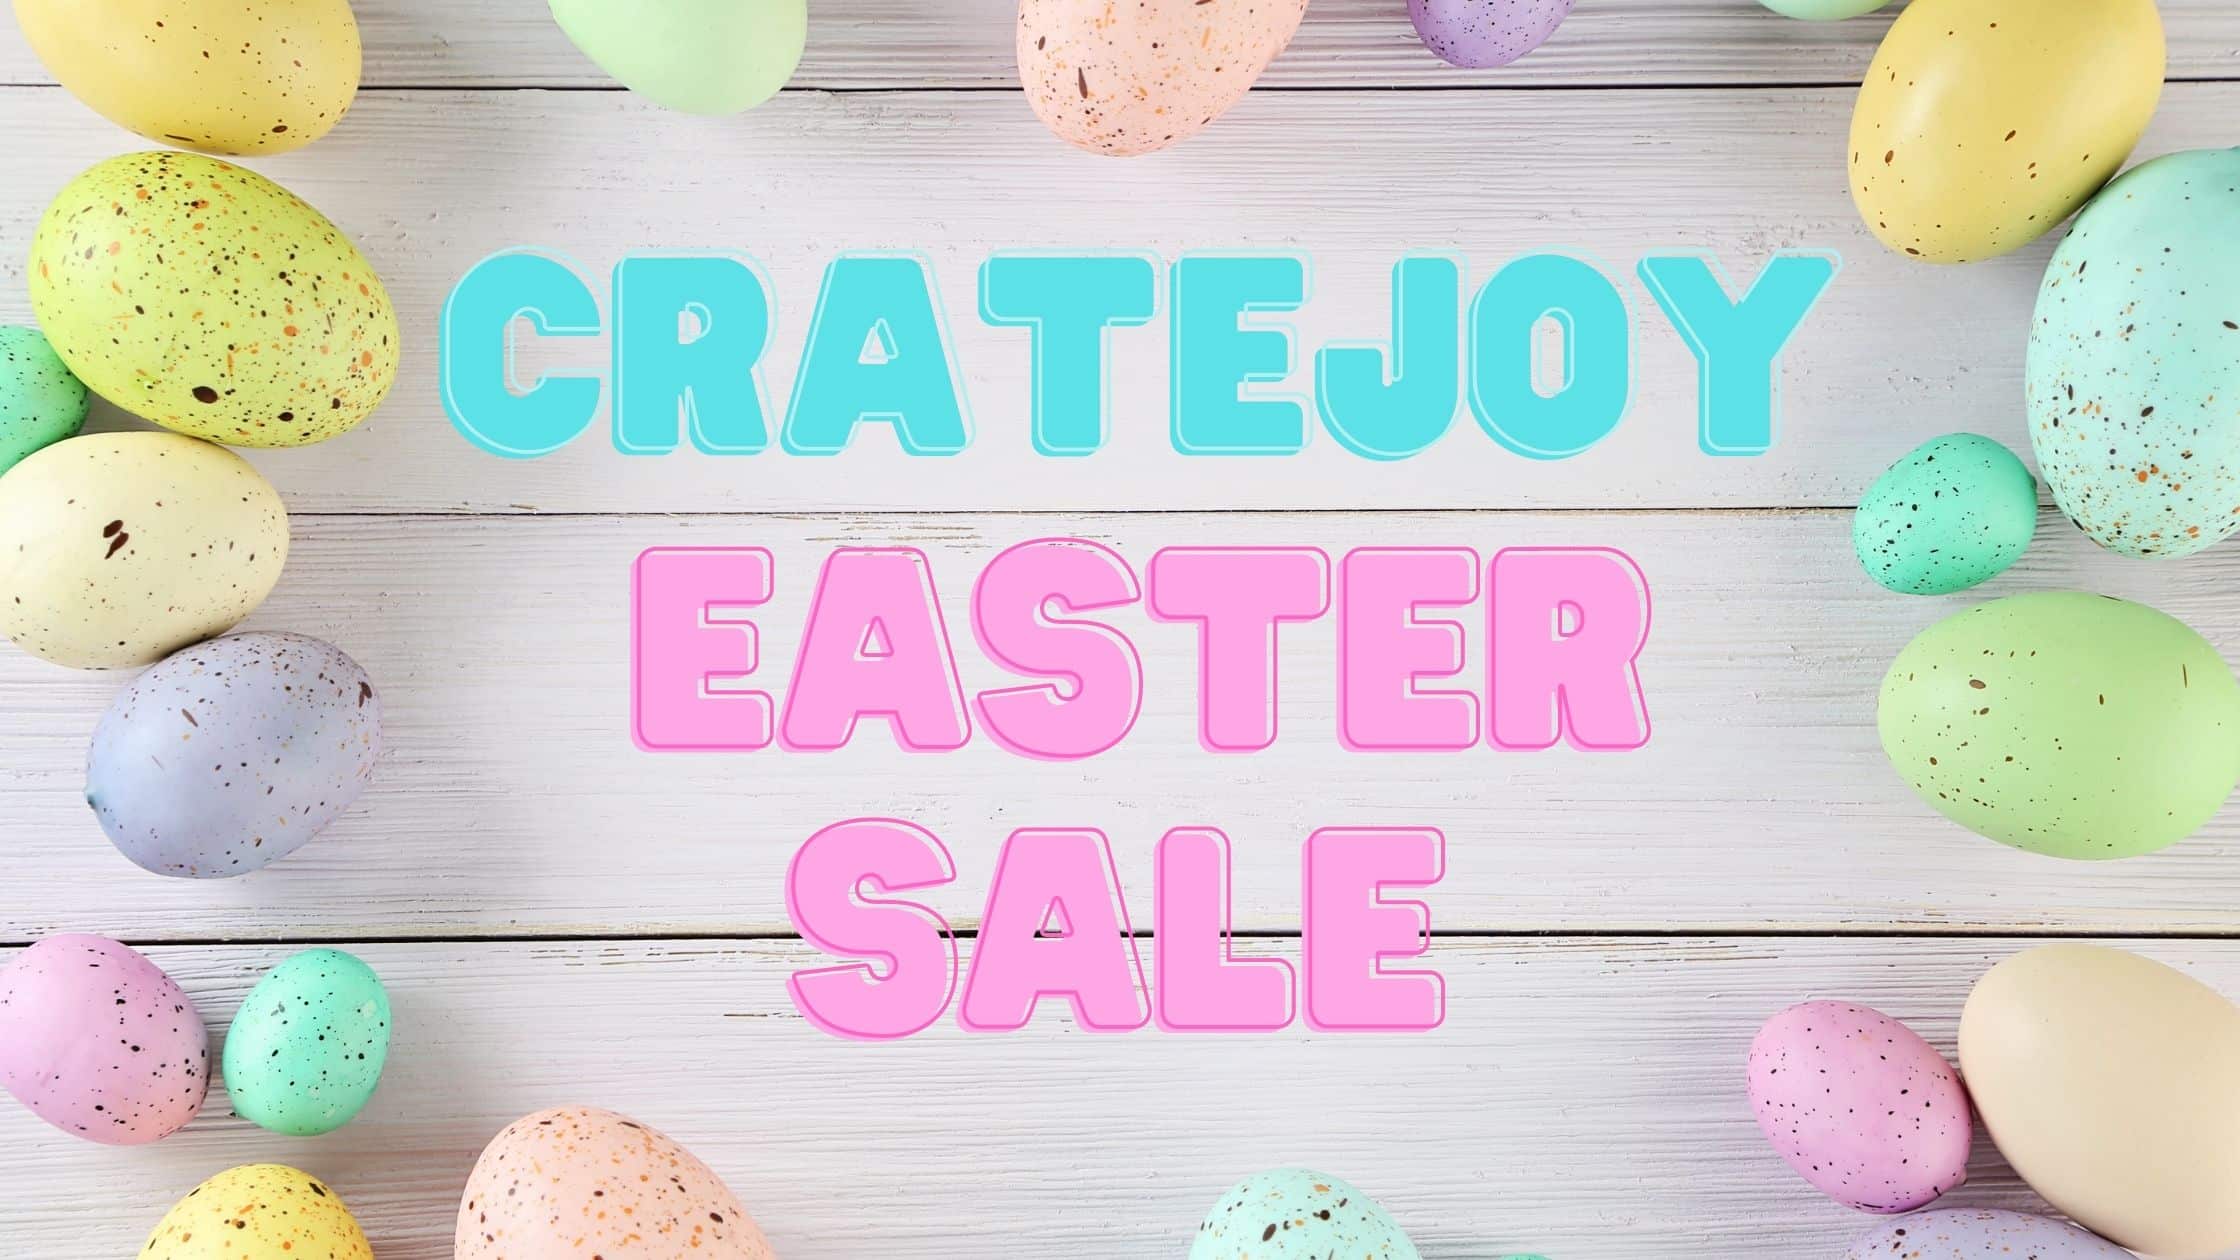 cratejoy easter 2022 flash sale save 30 off first box of 3 month subscription 1